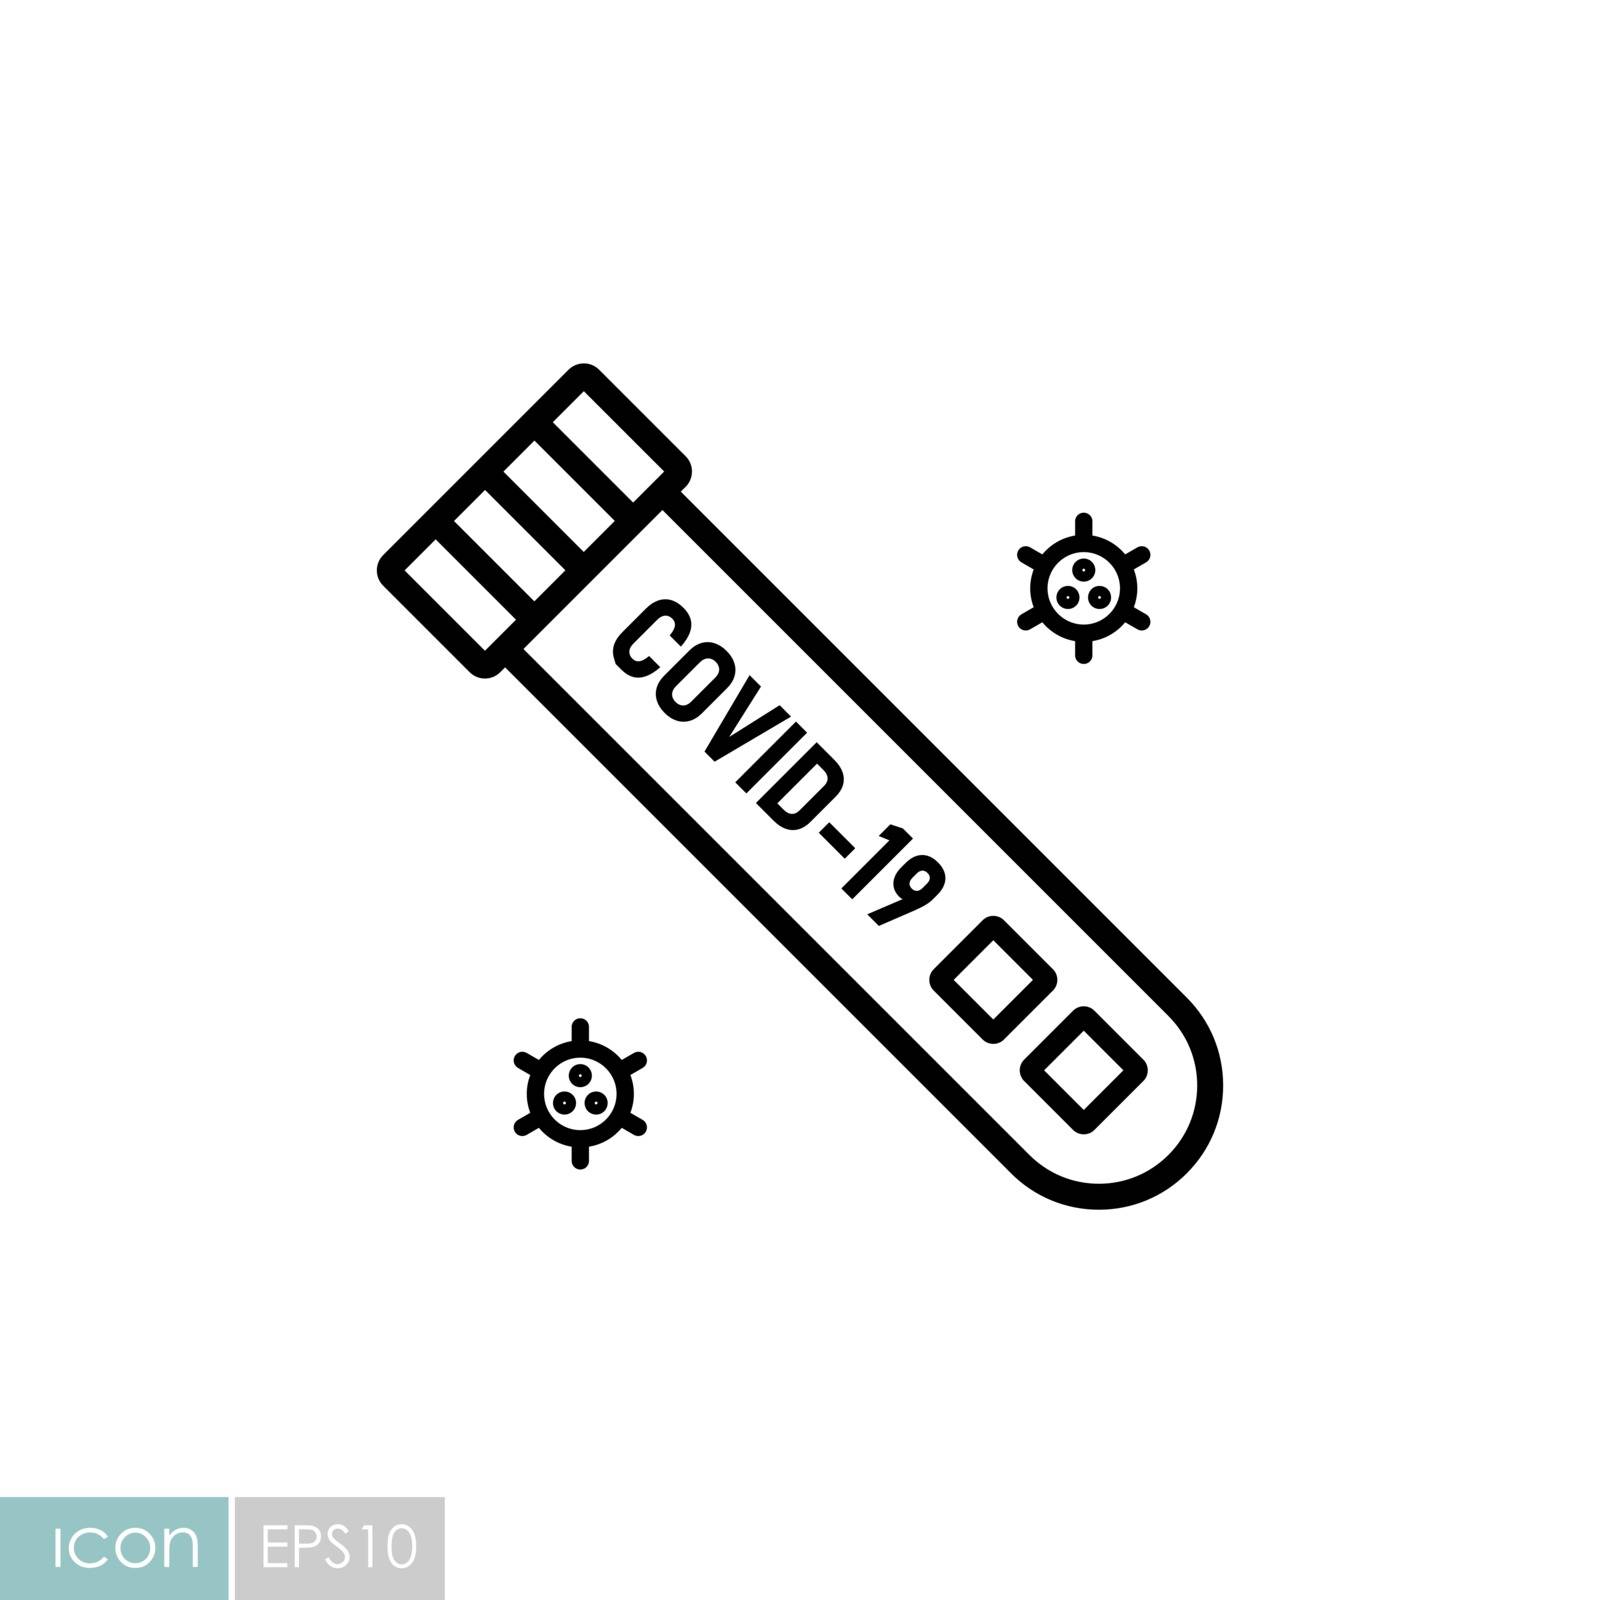 Coronavirus blood test tube vector icon. Medical sign. Graph symbol for medical web site and apps design, logo, app, UI